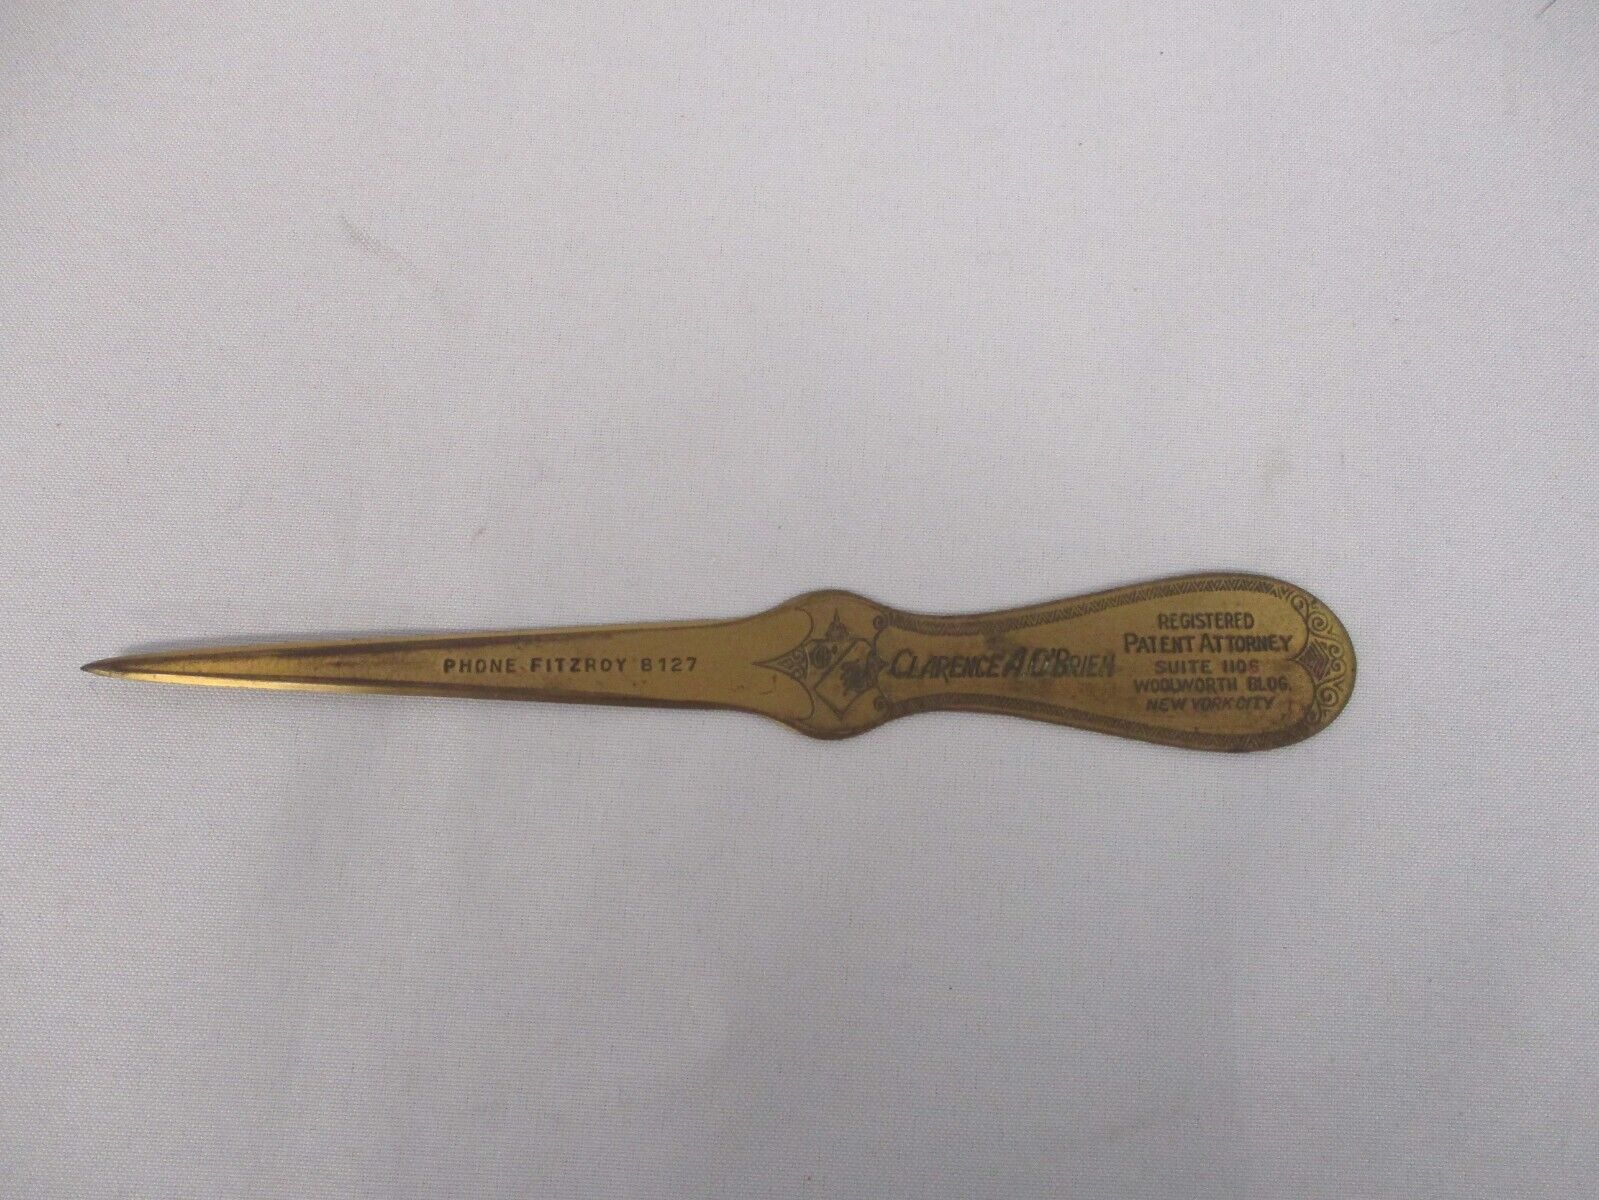 VINTAGE CLARENCE O\'BRIEN PATENT ATTORNEY NEW YORK CITY LETTER OPENER ~ 8\